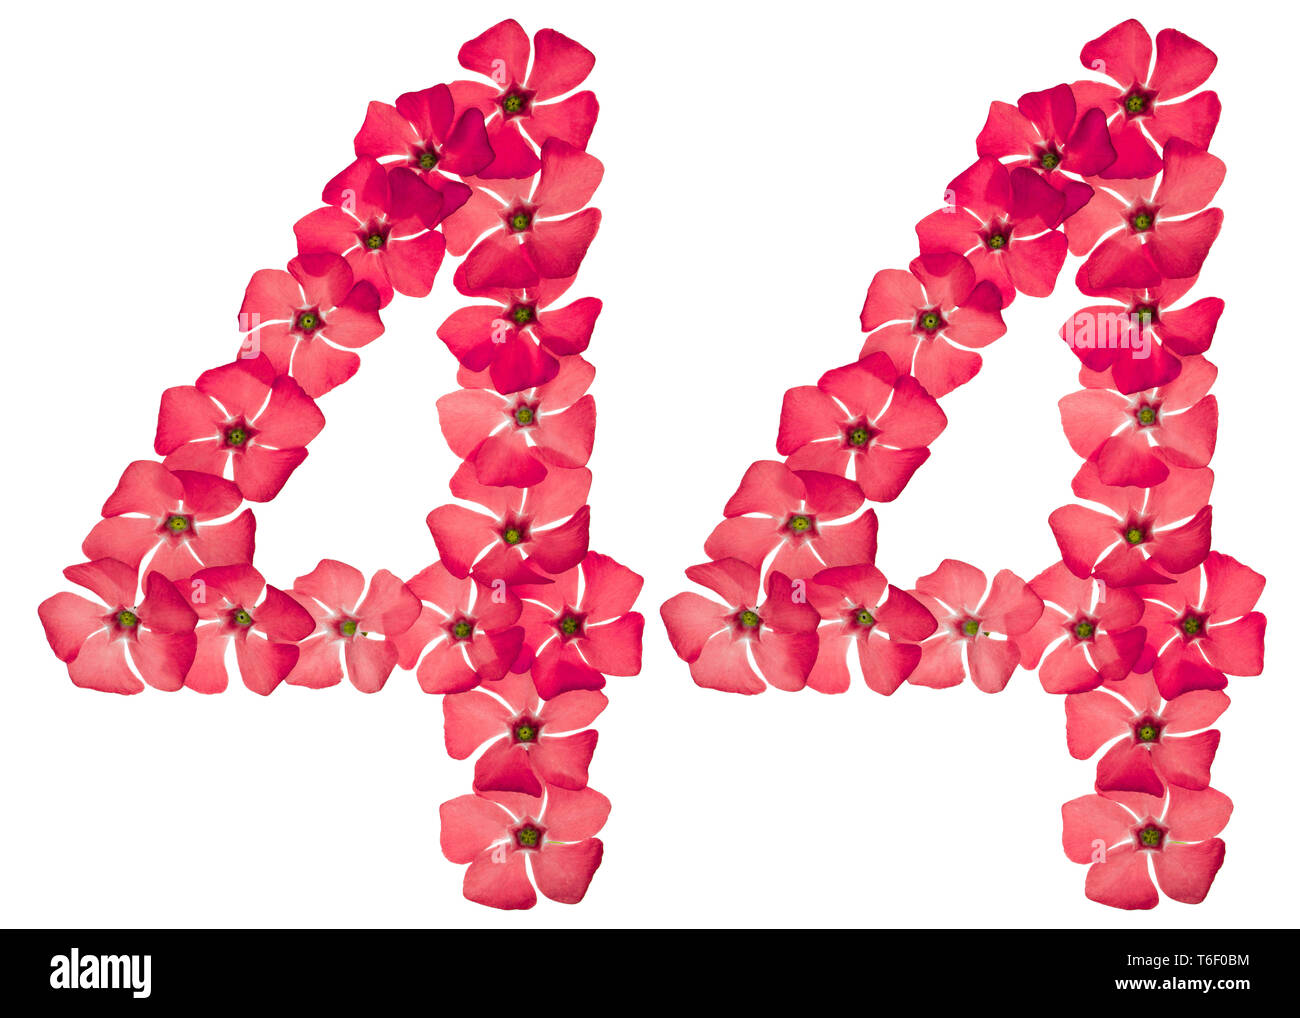 Happy Birthday Forty Four 44 High Resolution Stock Photography and ...